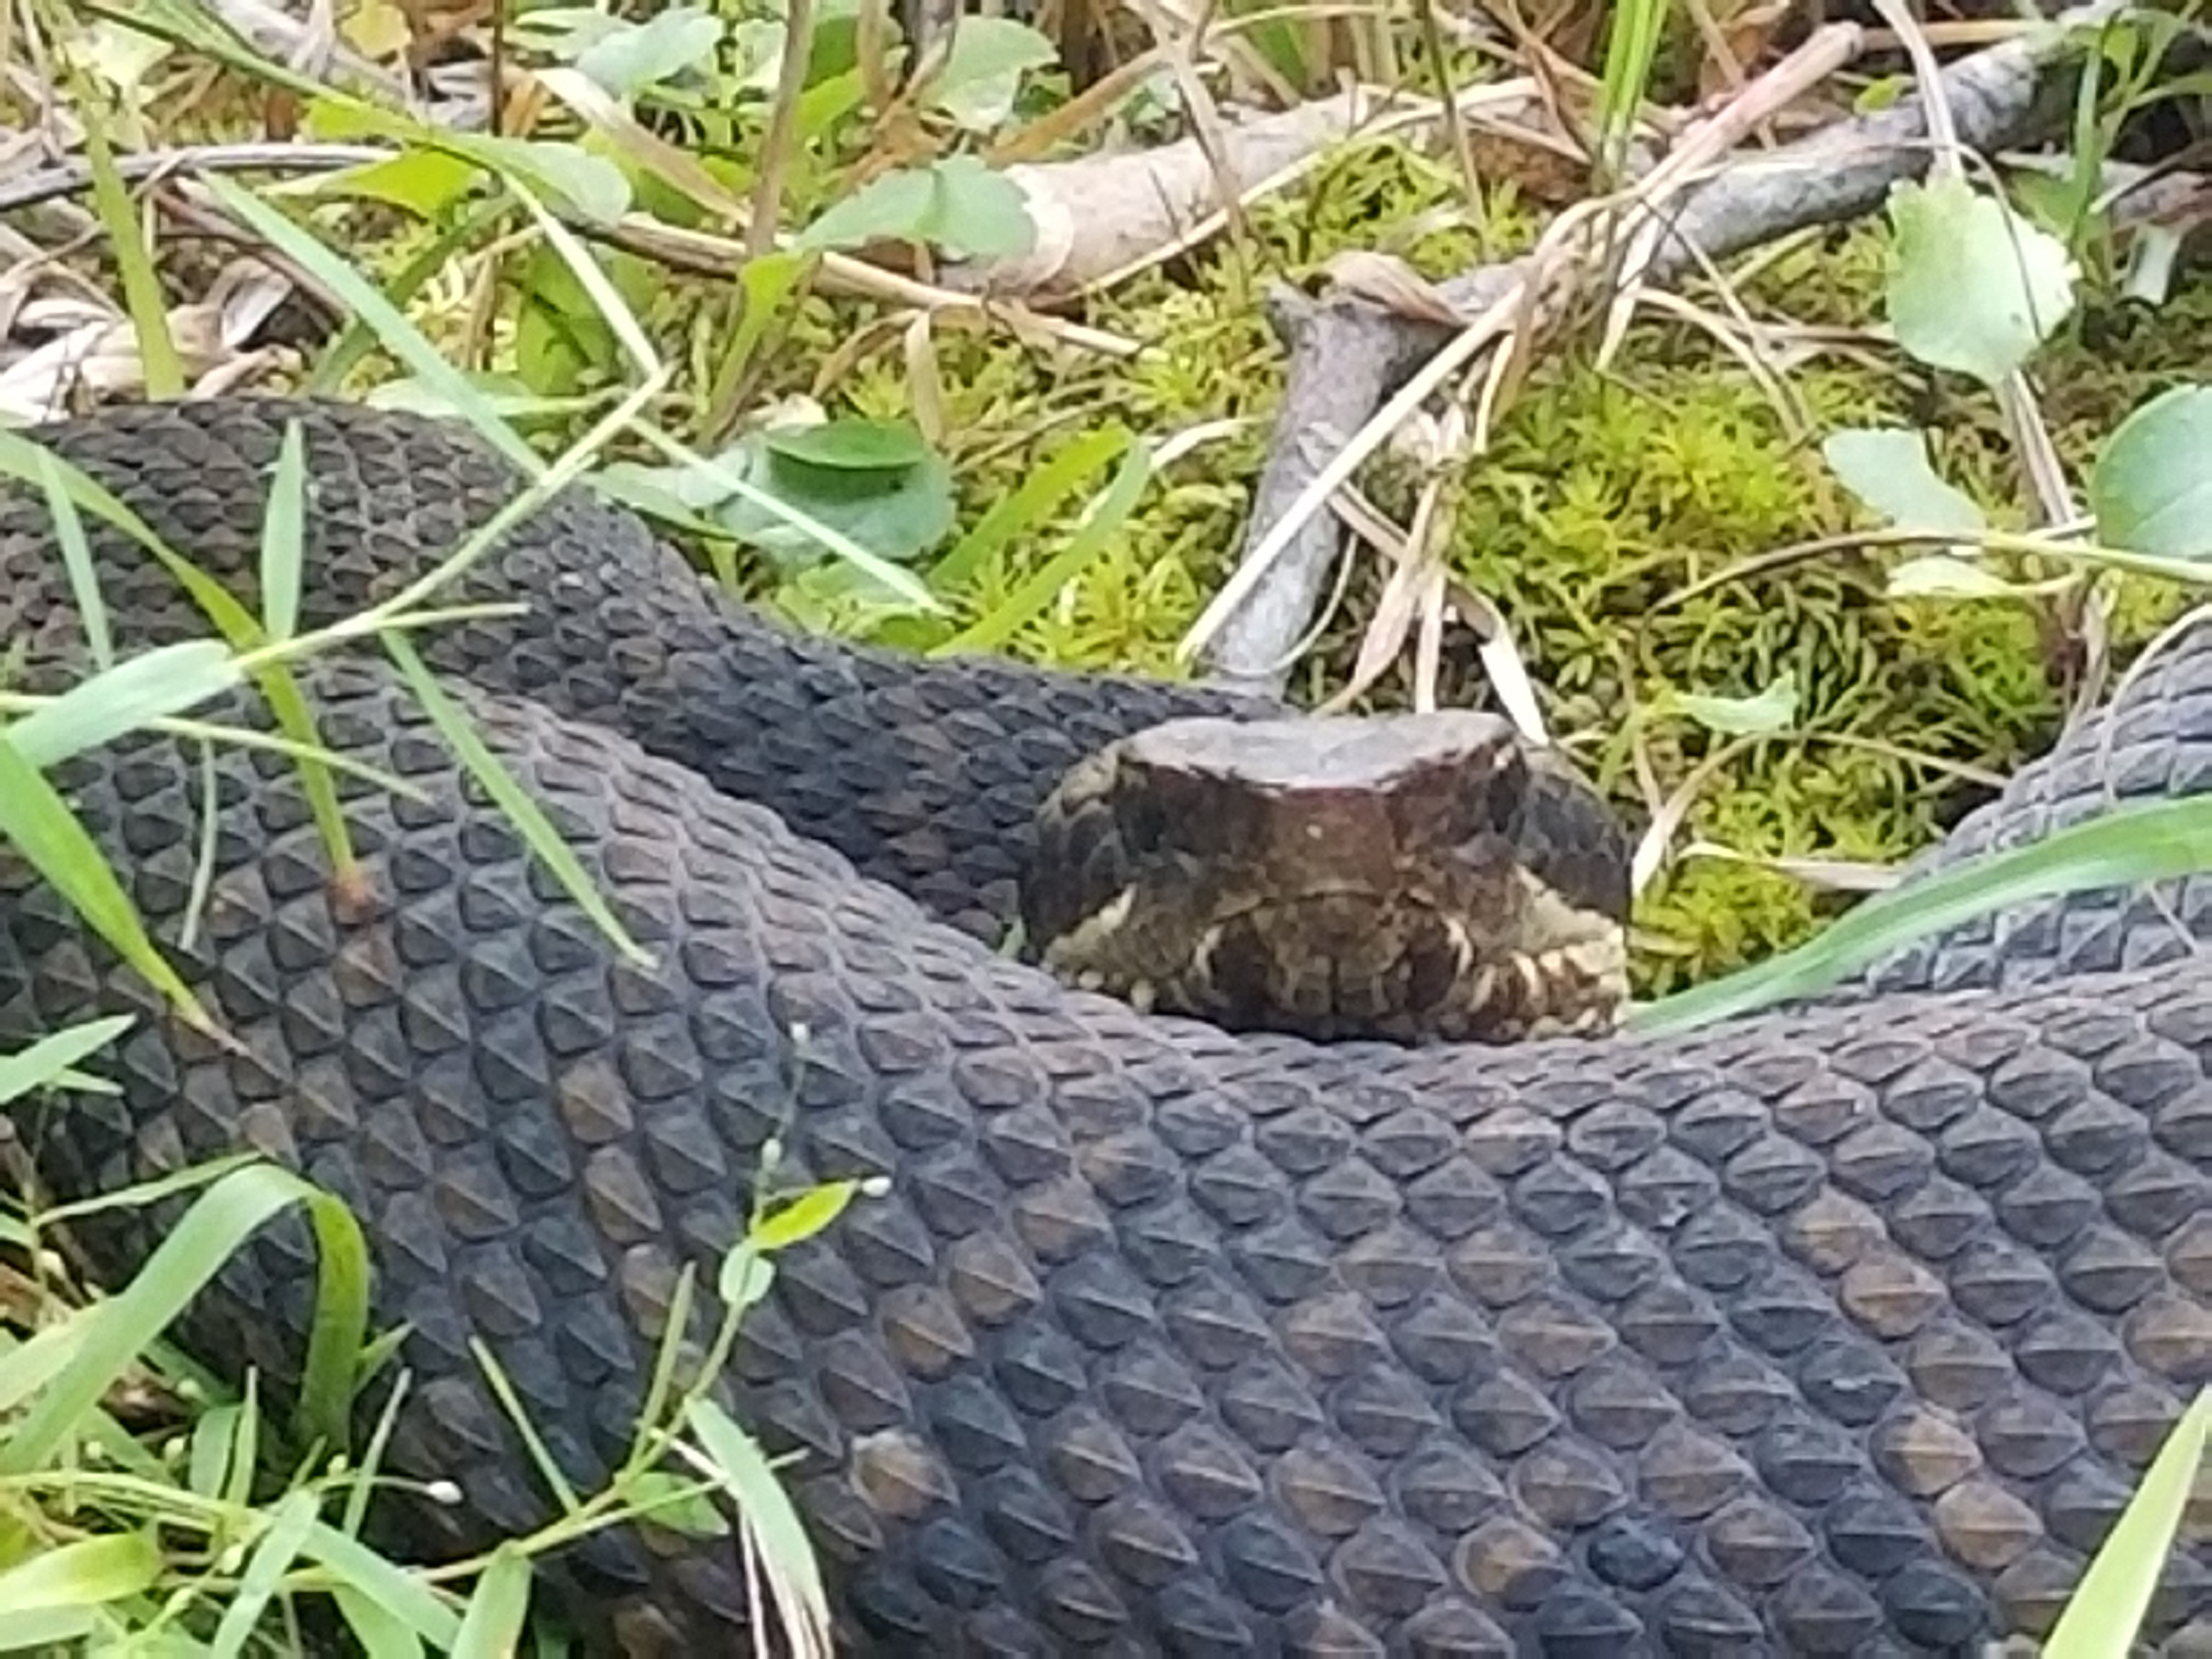 Cottonmouth / Water Moccasin